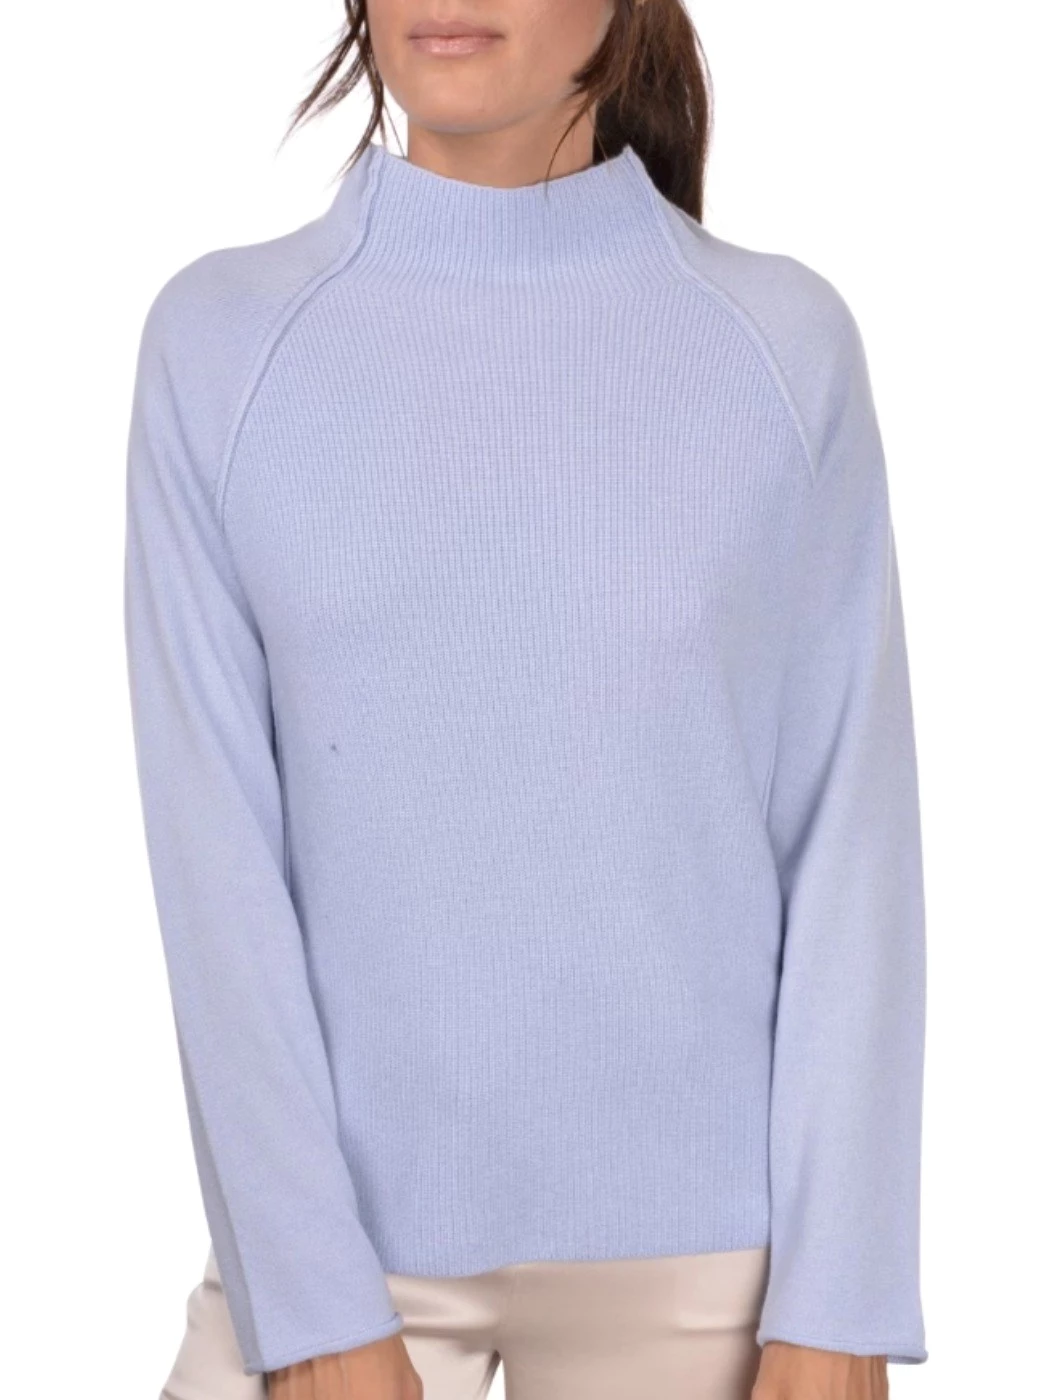 English knitted turtleneck in Gran Sasso chasmere